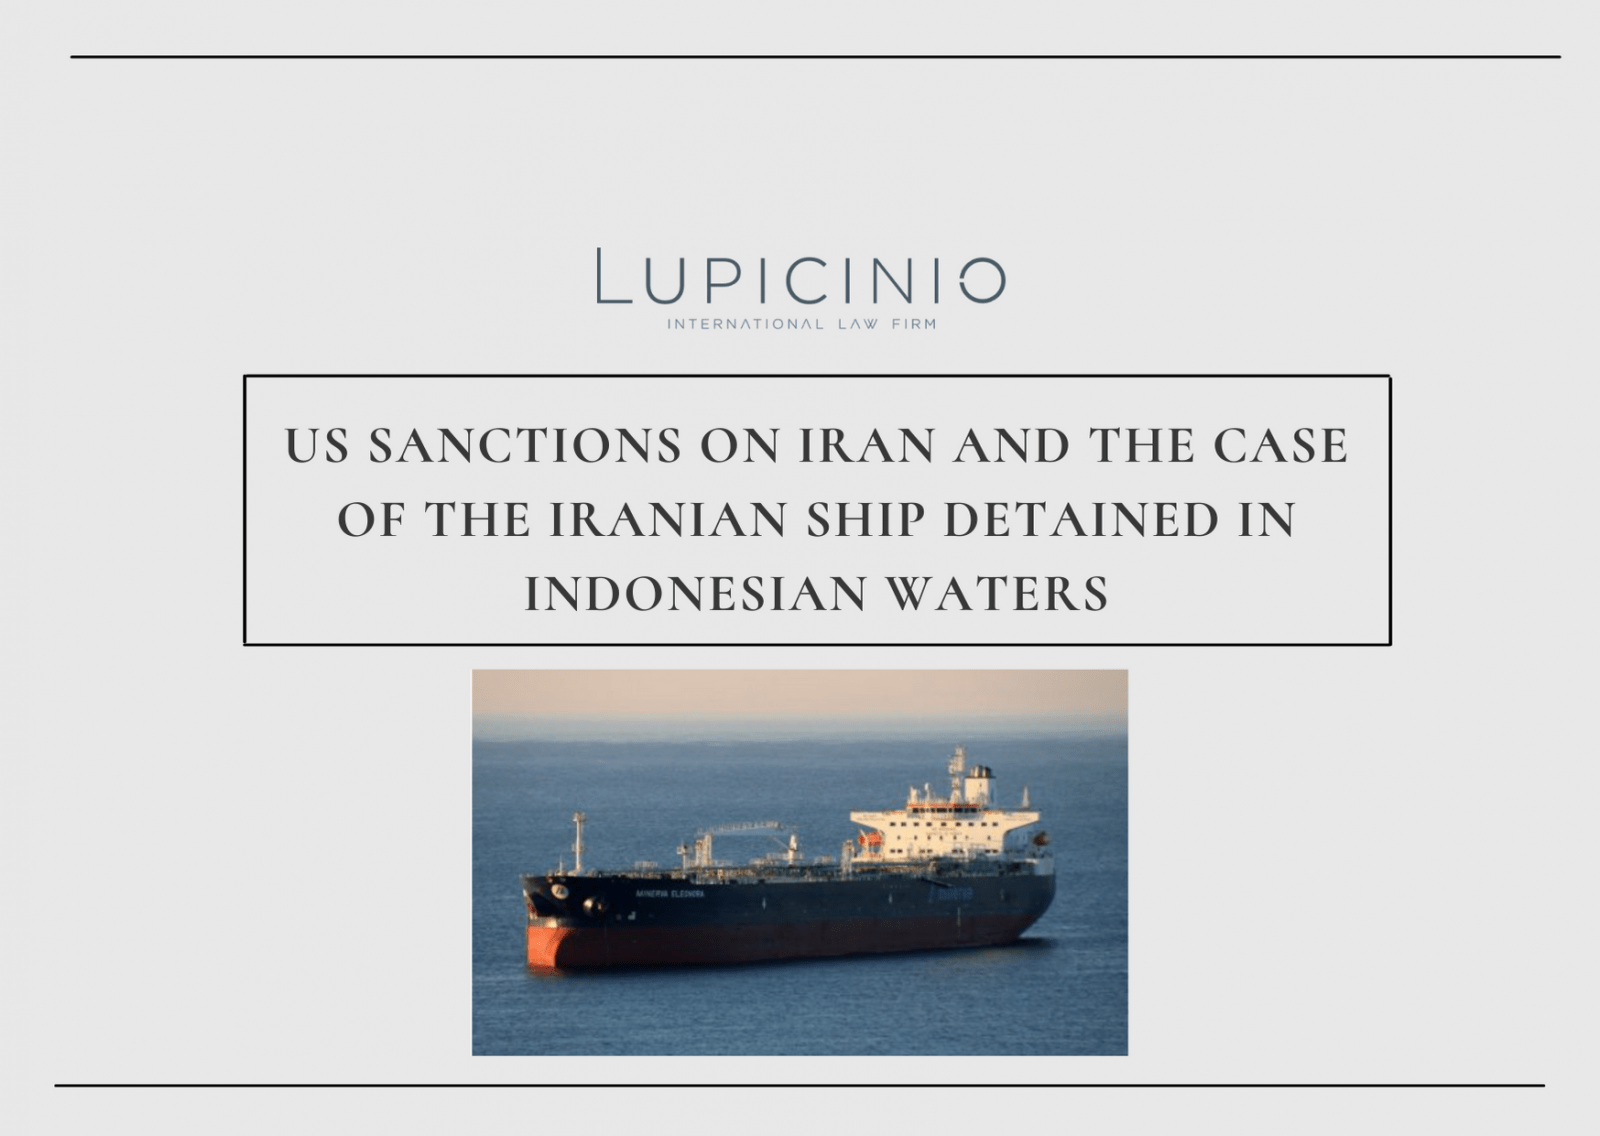 US SANCTIONS ON IRAN AND THE CASE OF THE IRANIAN SHIP DETAINED IN INDONESIAN WATERS